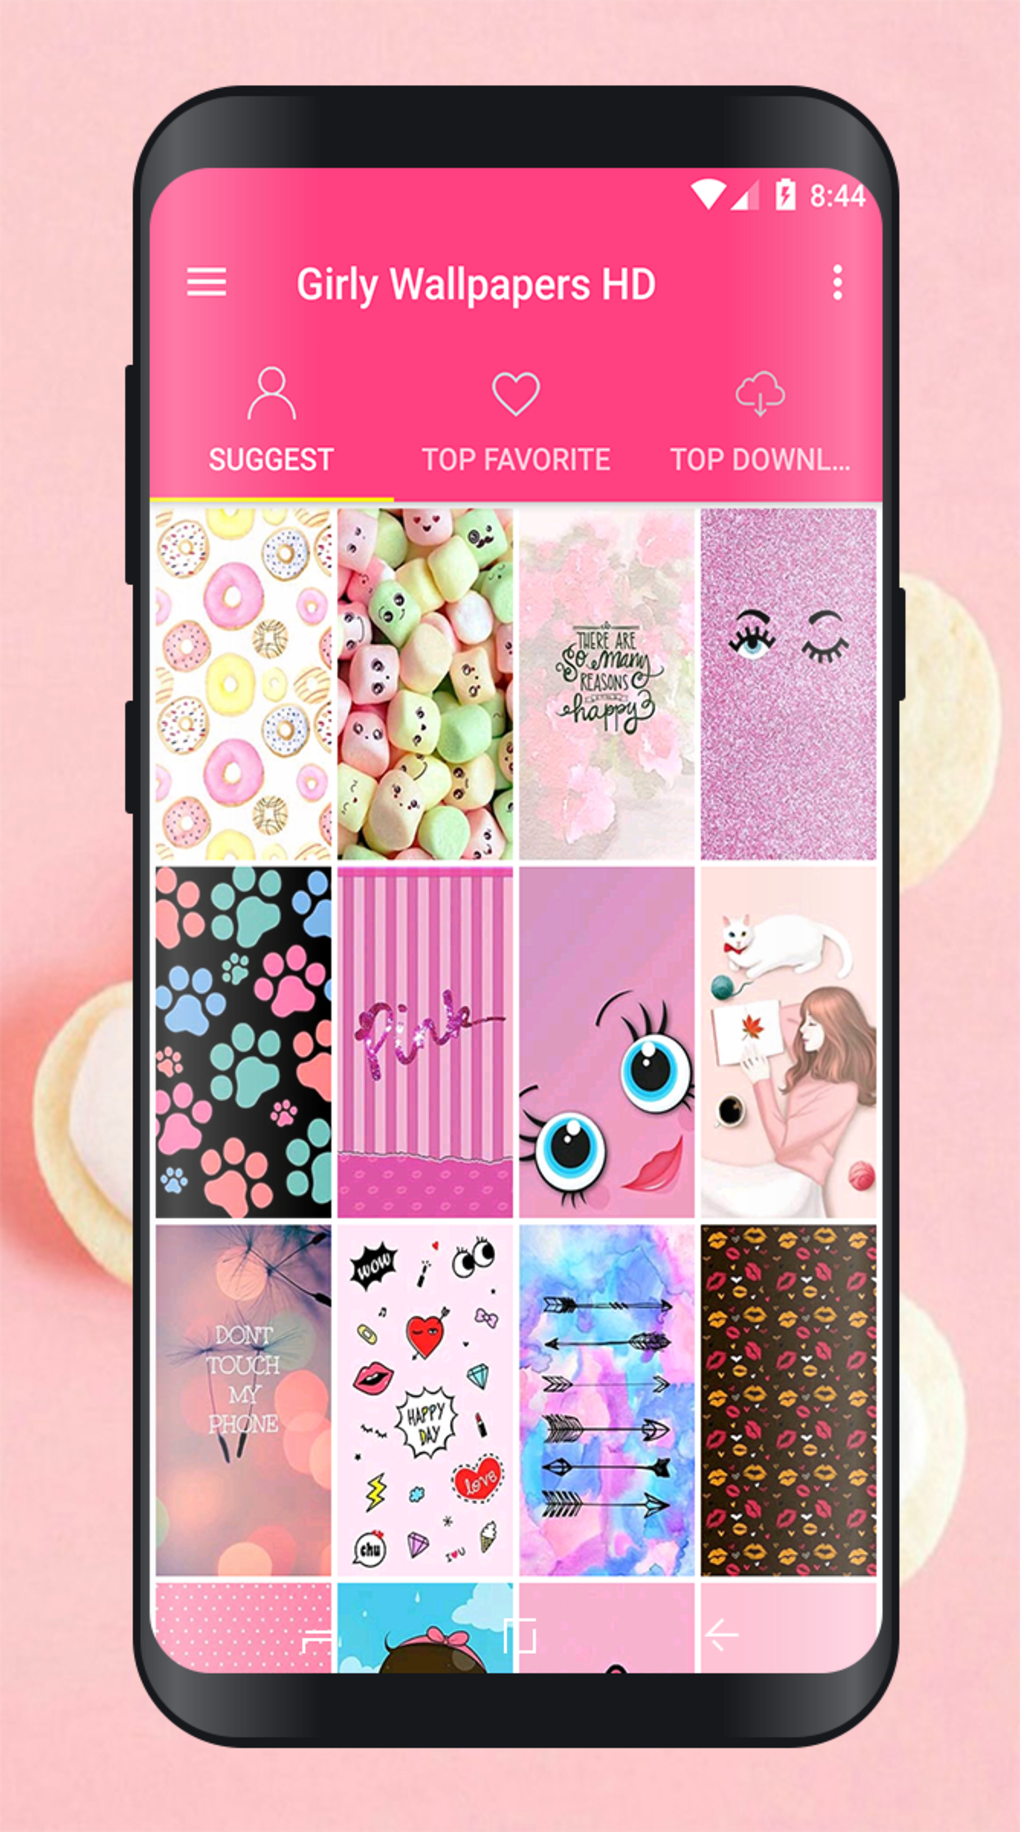 Girly Lock Screen with Quotes  Free Offline APK Download  Android Market